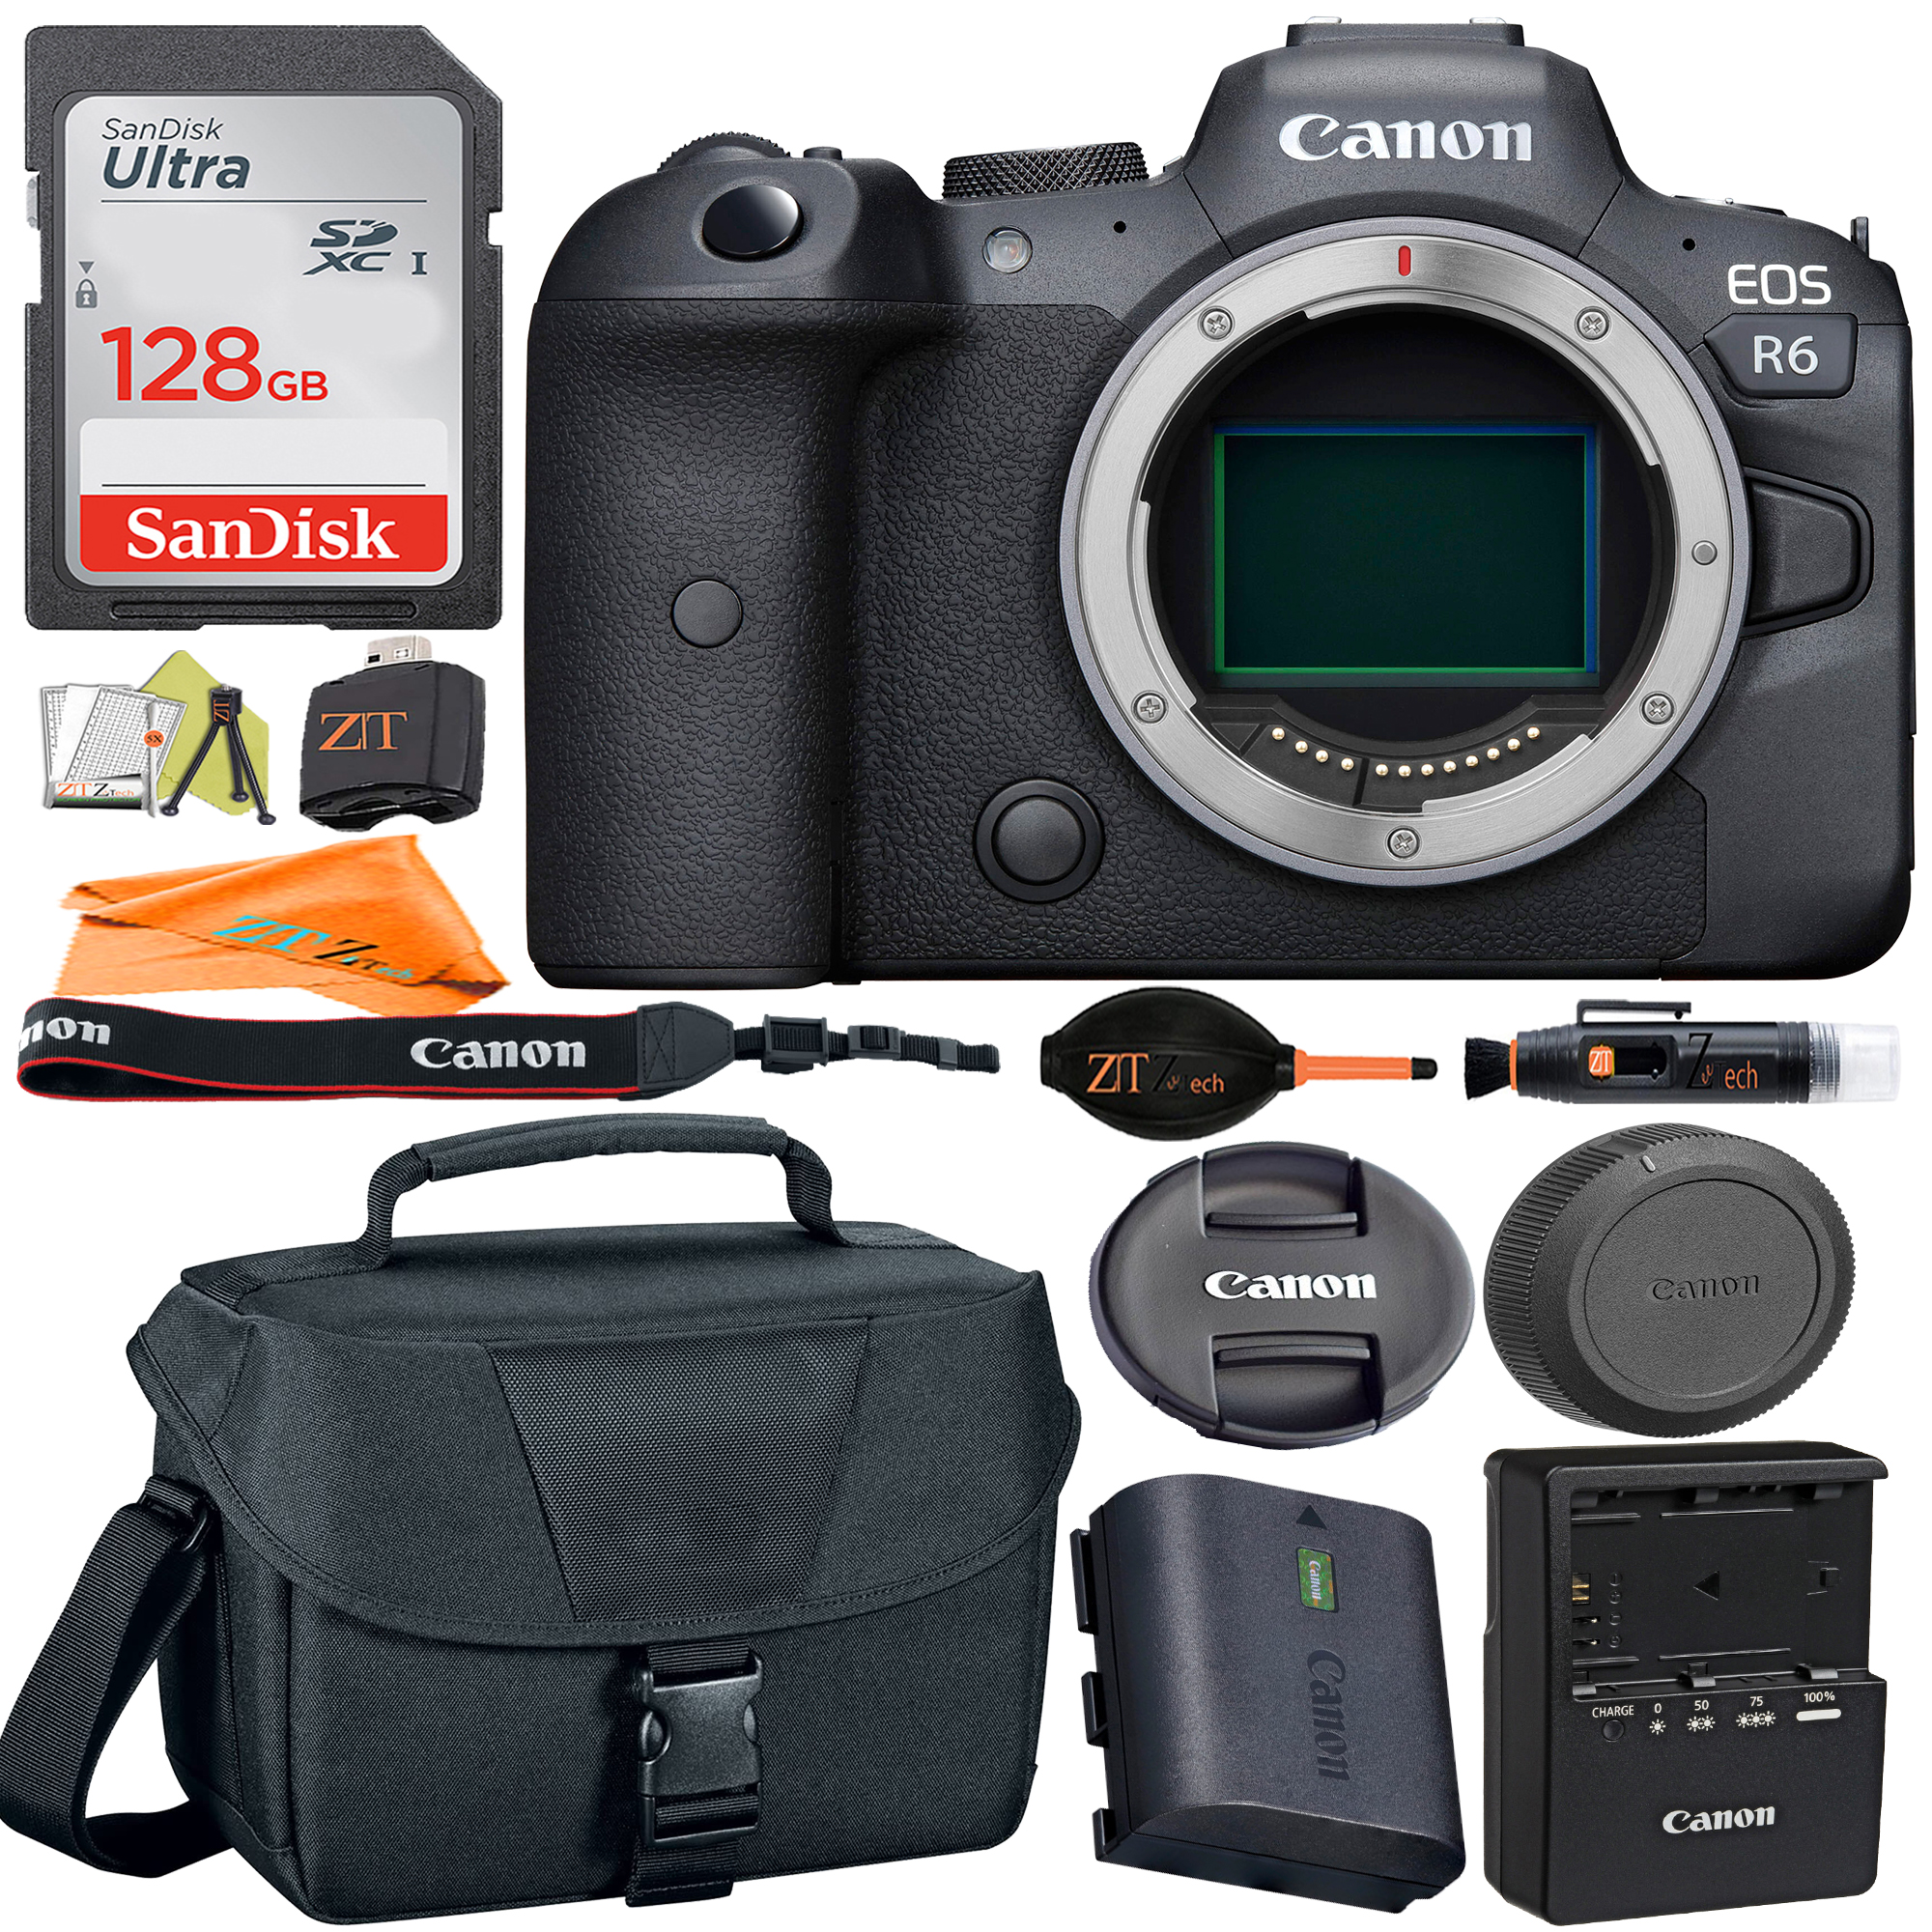 Canon EOS R6 Mirrorless Digital Camera (Body Only) 4K Video with SanDisk 128GB Memory Card + Case + ZeeTech Accessory Bundle